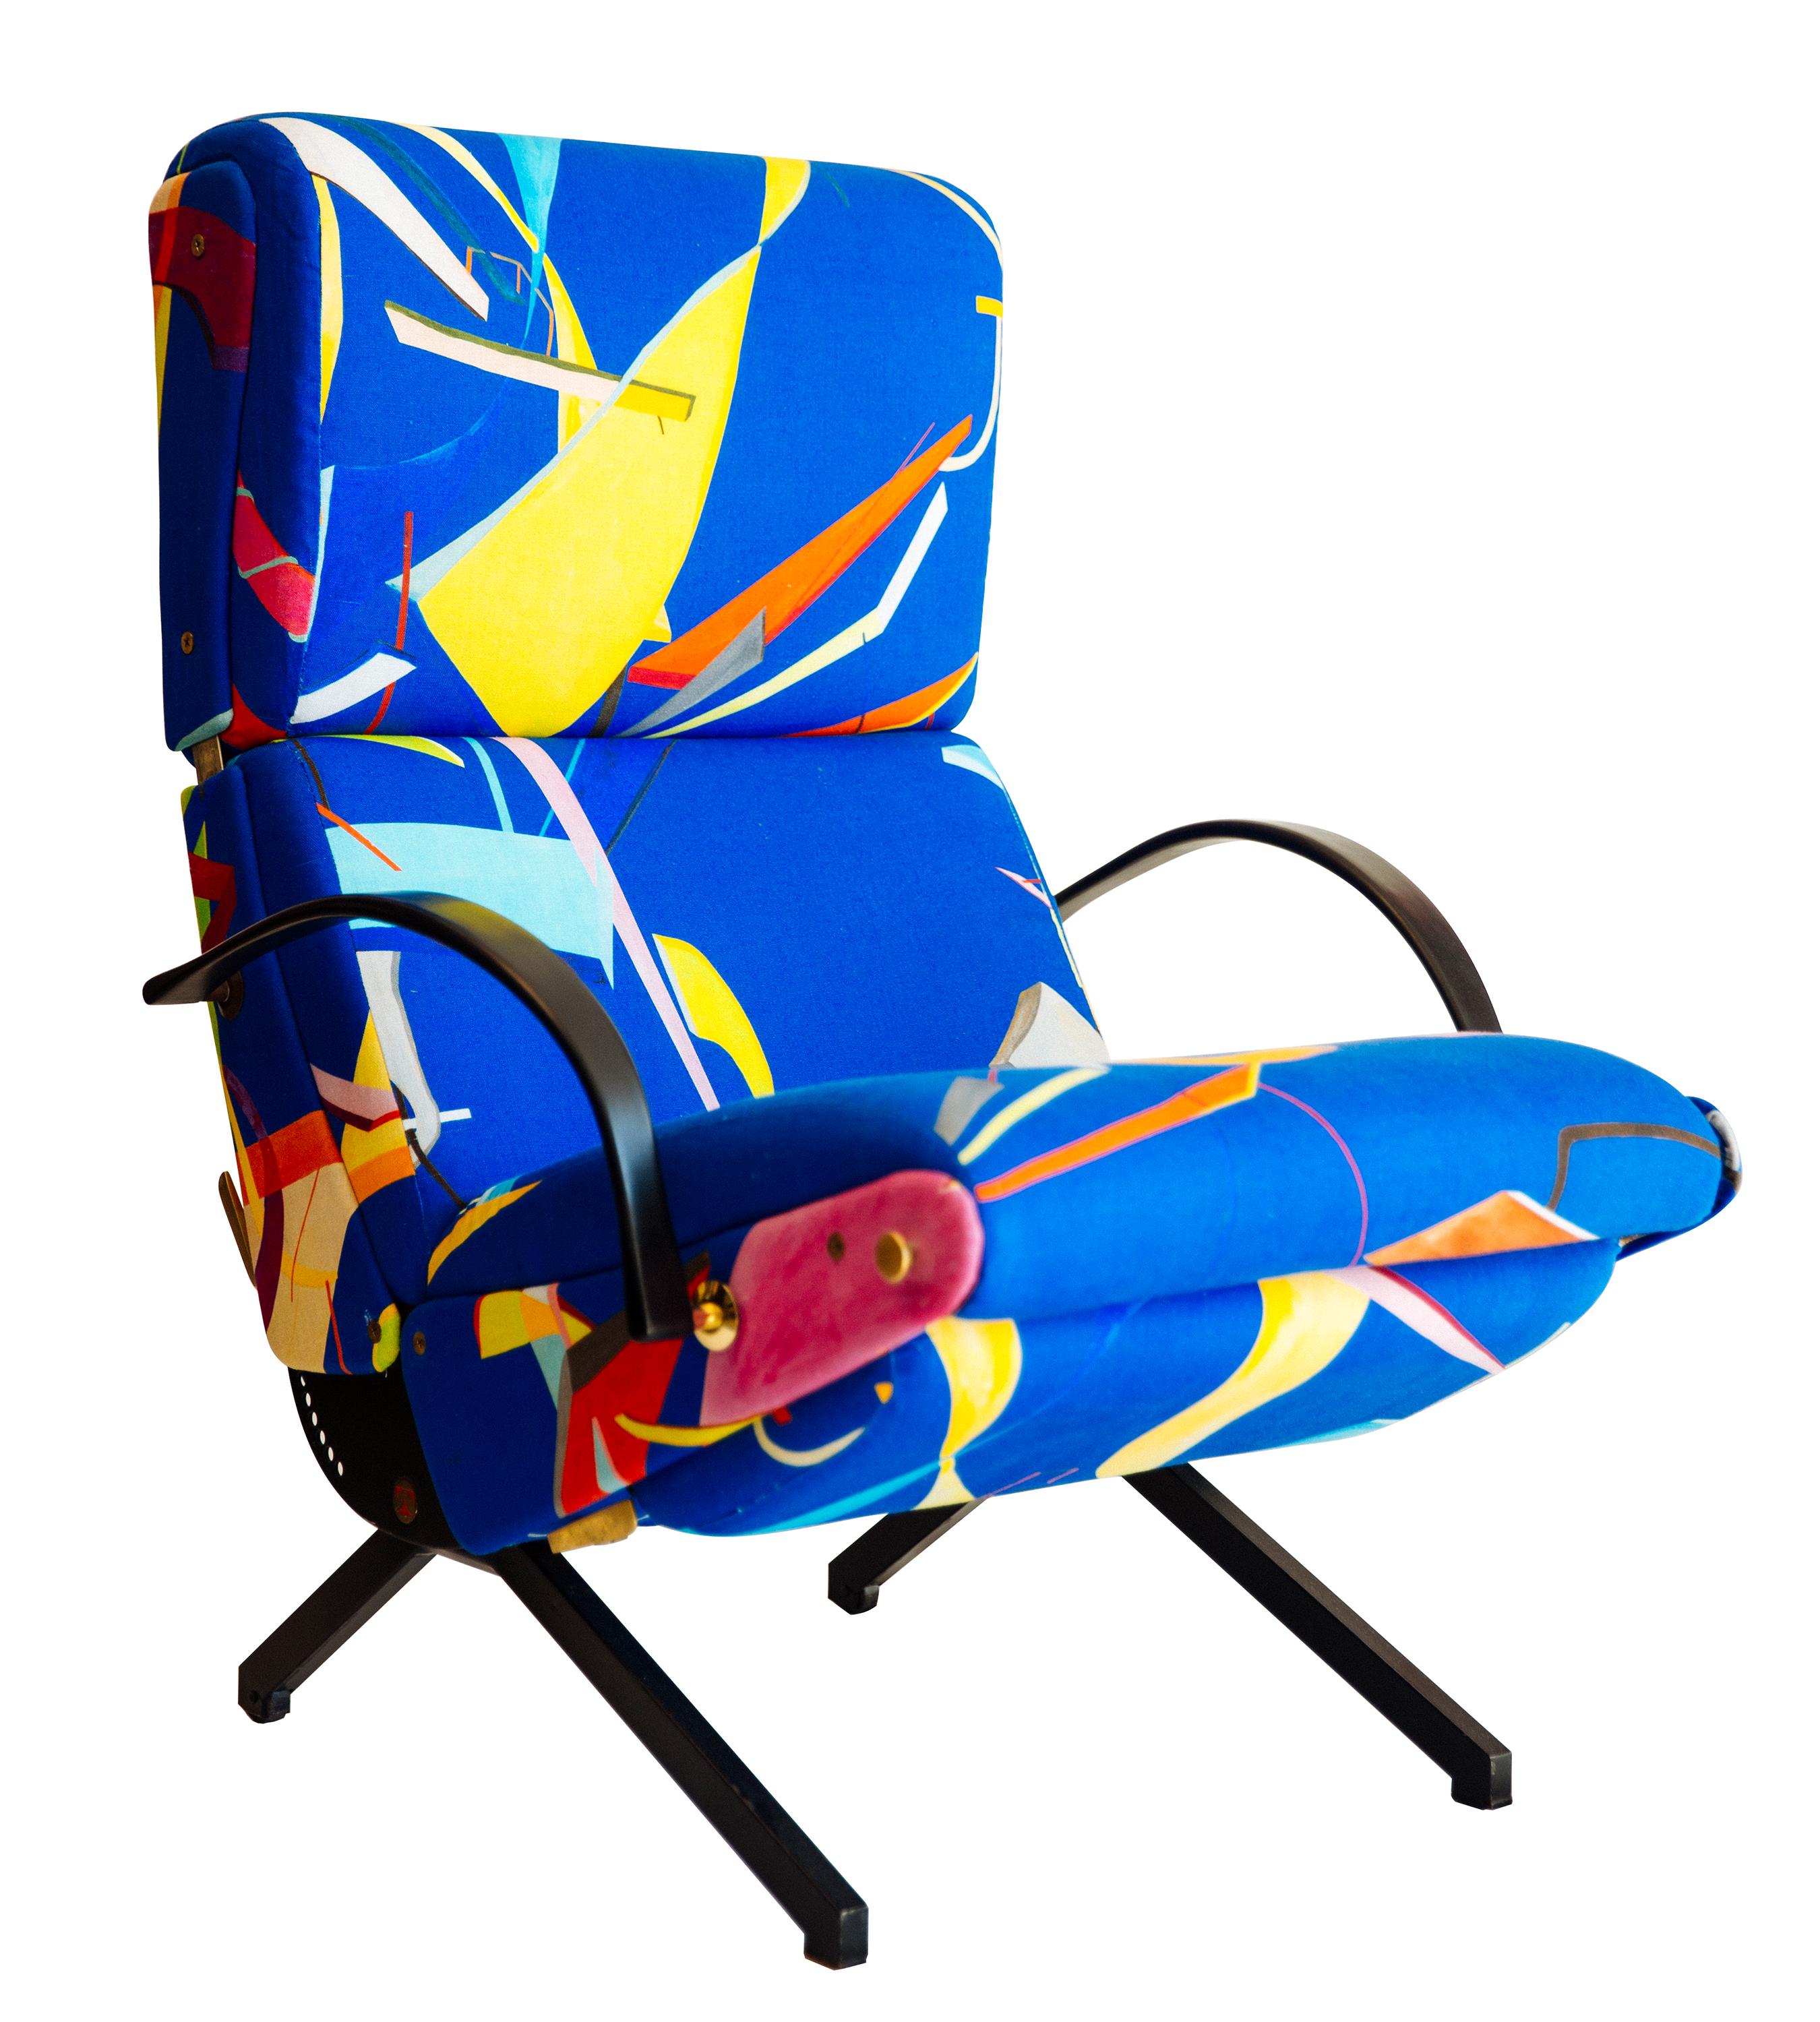 A newly reupholstered Osvaldo Borsani P40 Tecno chair.
Upholstery: VOUTSA George Blue linen
Designed in 1955

Following on the success of the D70 divan at the 10th Triennale Exhibition of 1954, Borsani began work on the IDEA of a mechanical